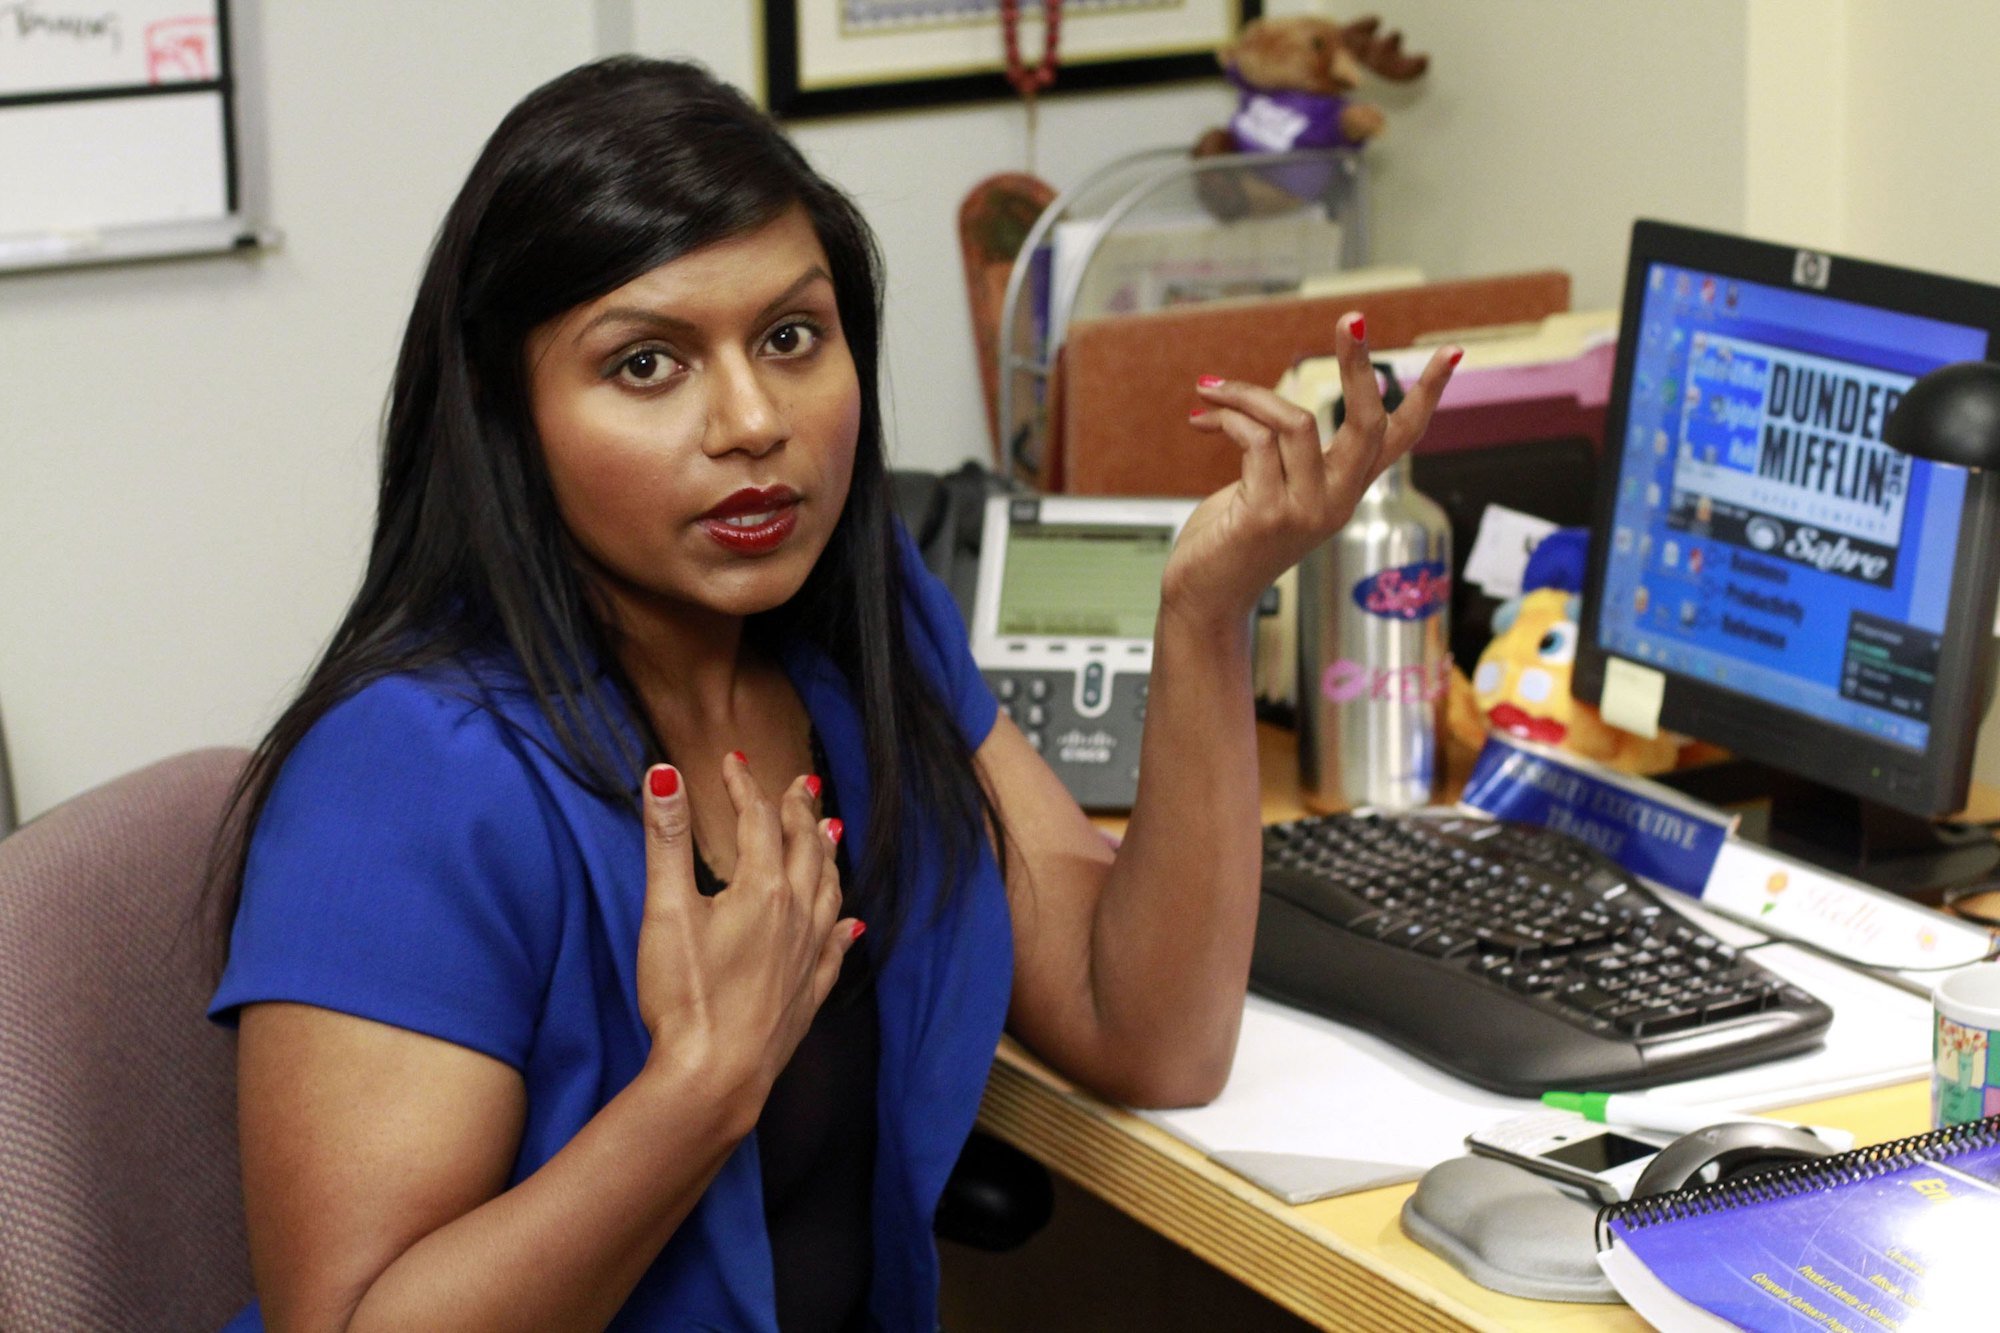 Mindy Kaling wearing a blue dress in 'The Office.'